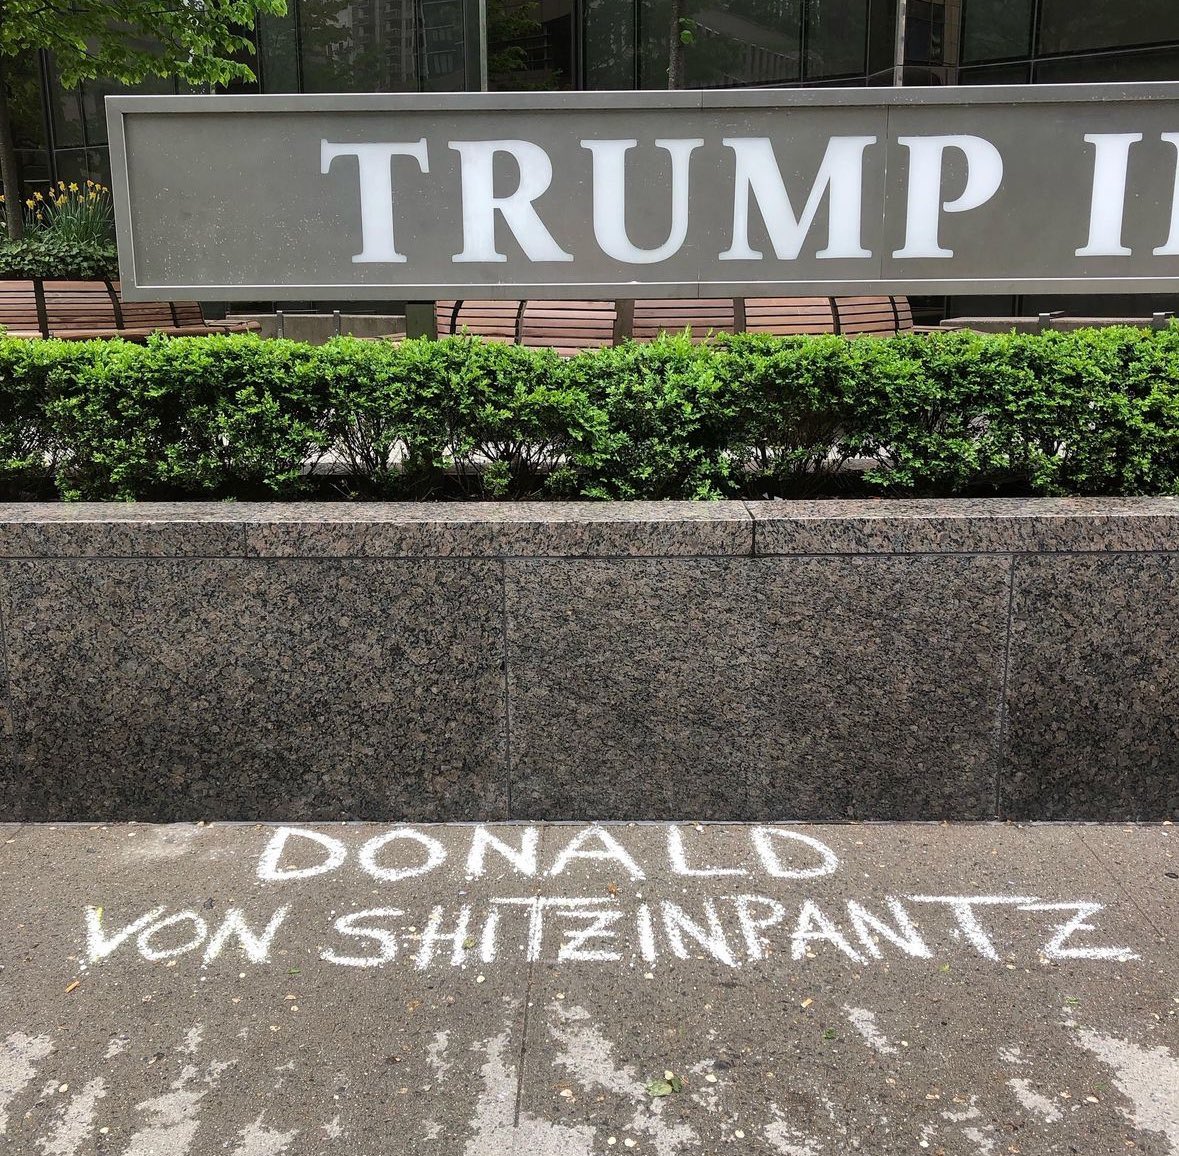 LOL!!! Outside of Donald Trump’s building in NYC! Love it!